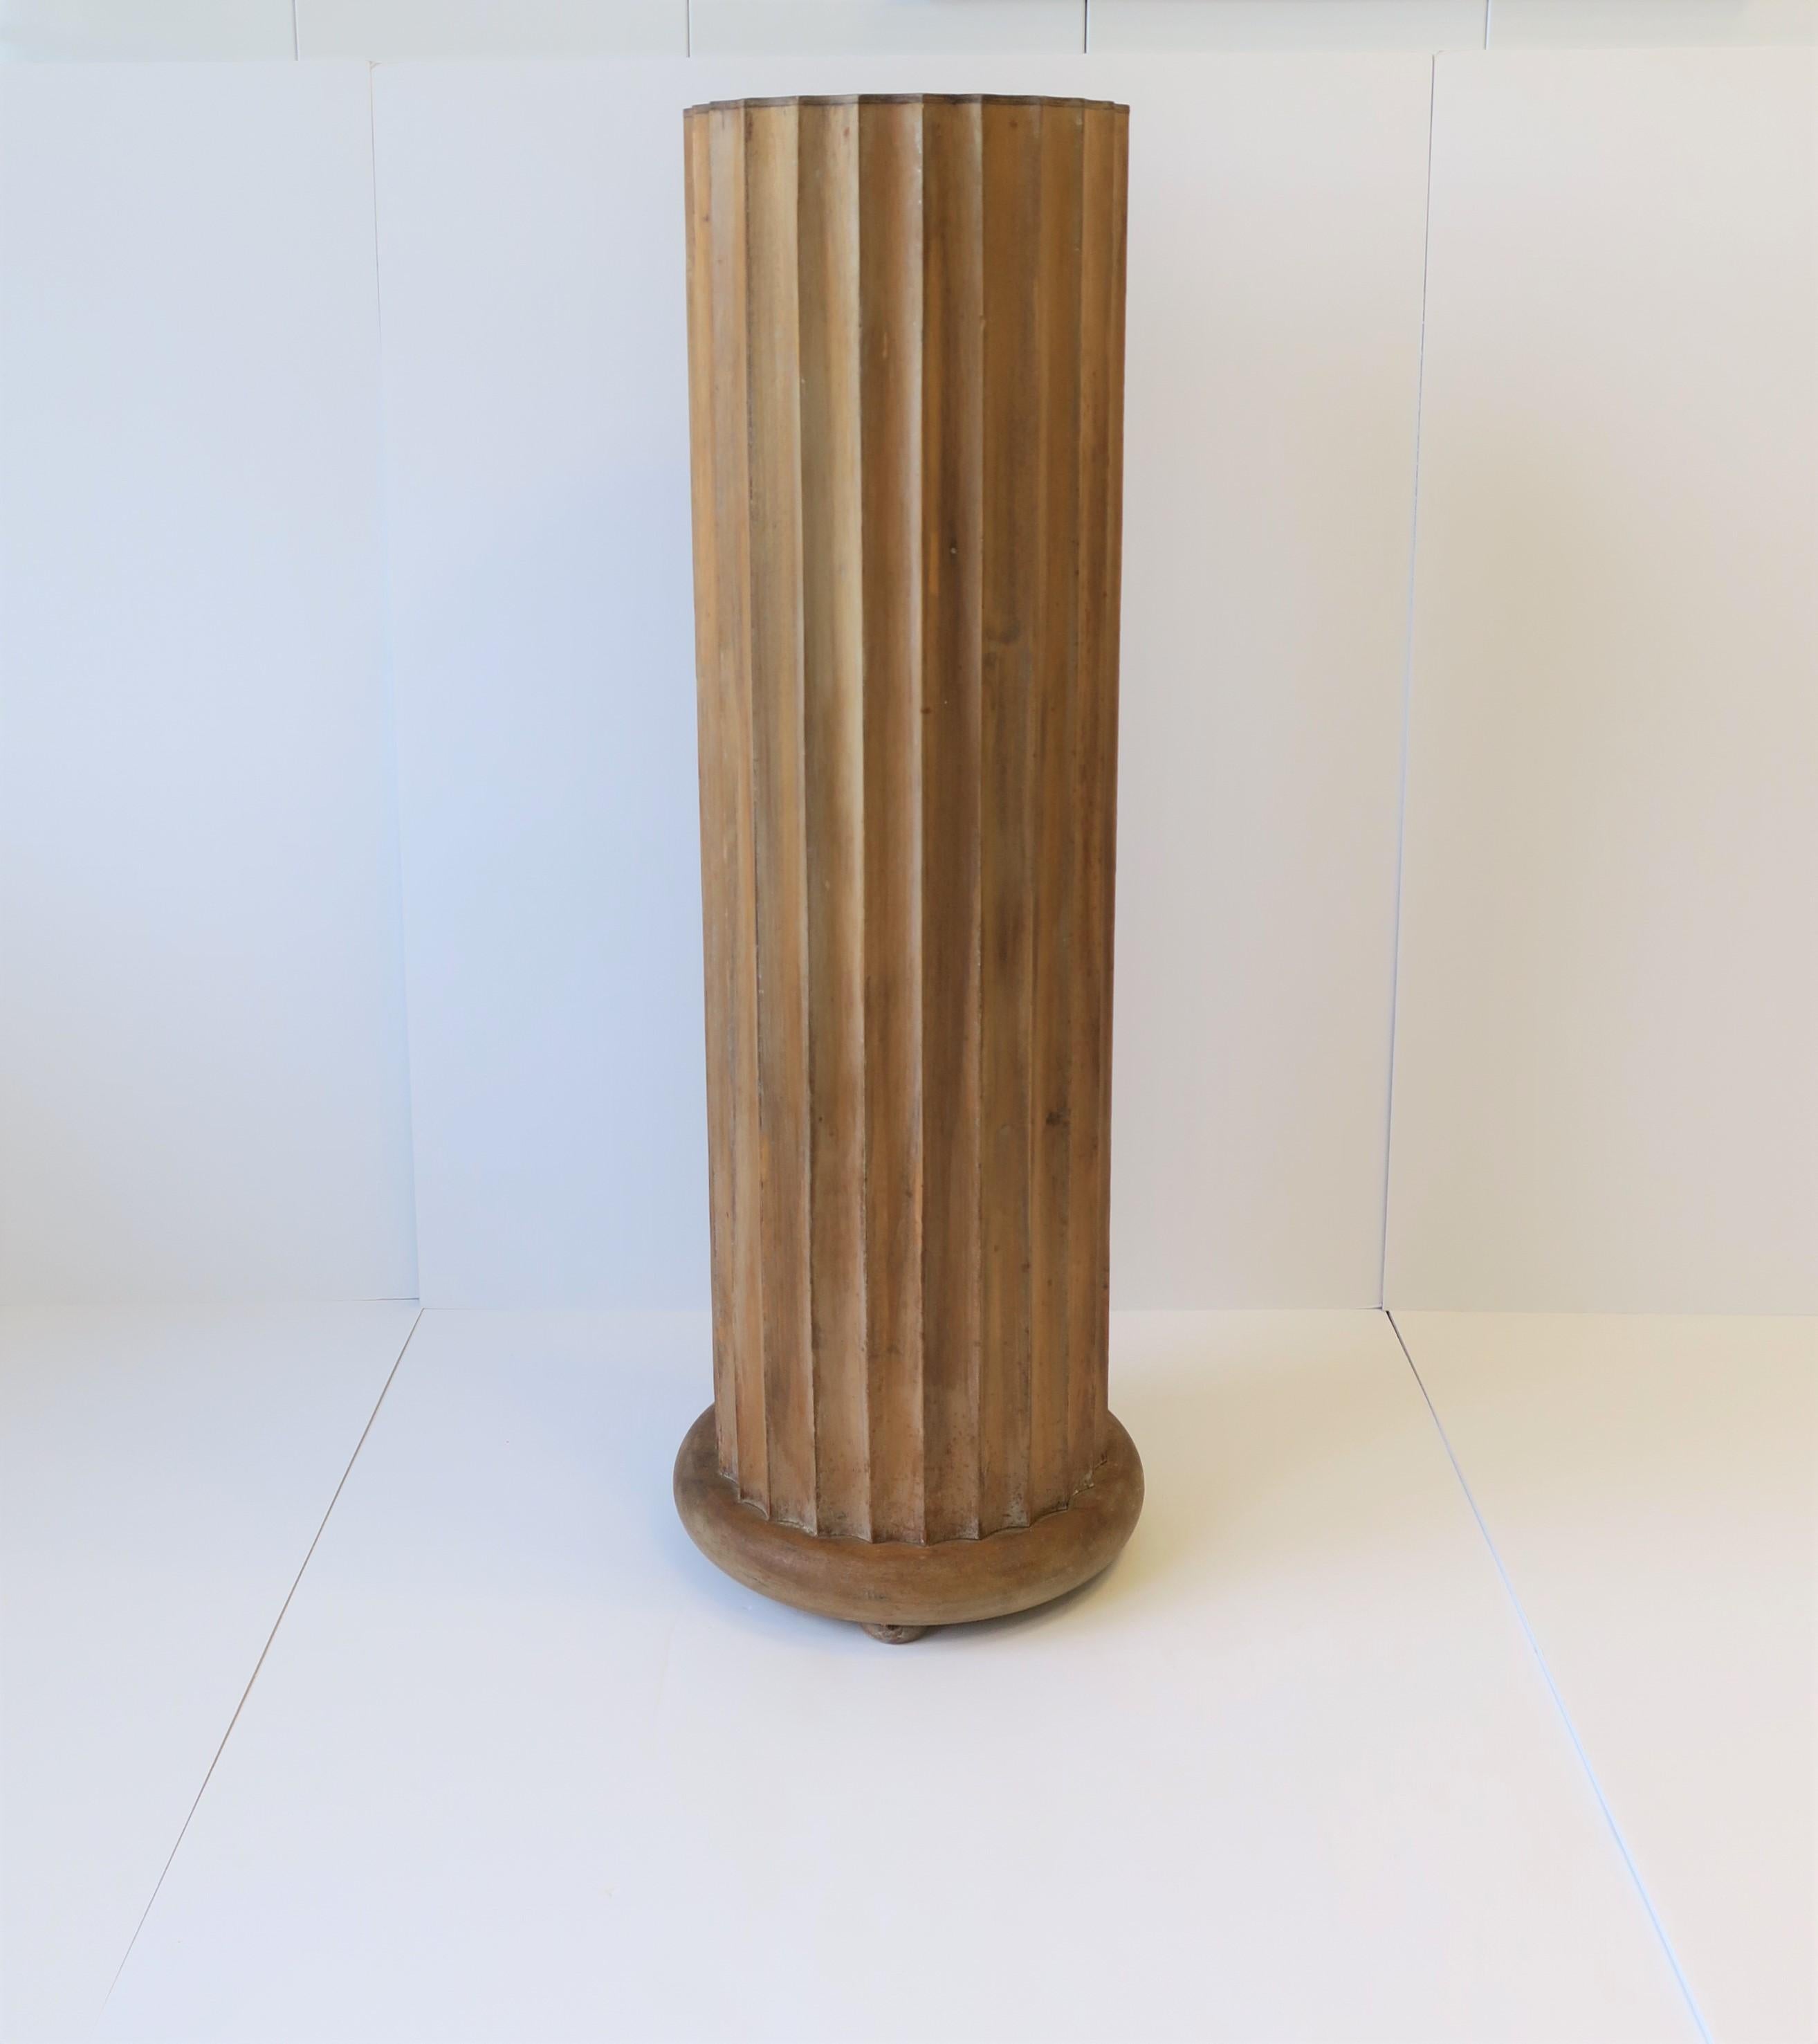 A beautiful Italian fluted wood pillar column pedestal stand, Italy. Pedestal is in the style of the 'Doric Order' column. Great for a sculpture, bust, plant, display, etc. Marked 'Made in Italy' on bottom as show in image #12.

Measurements: 
Top